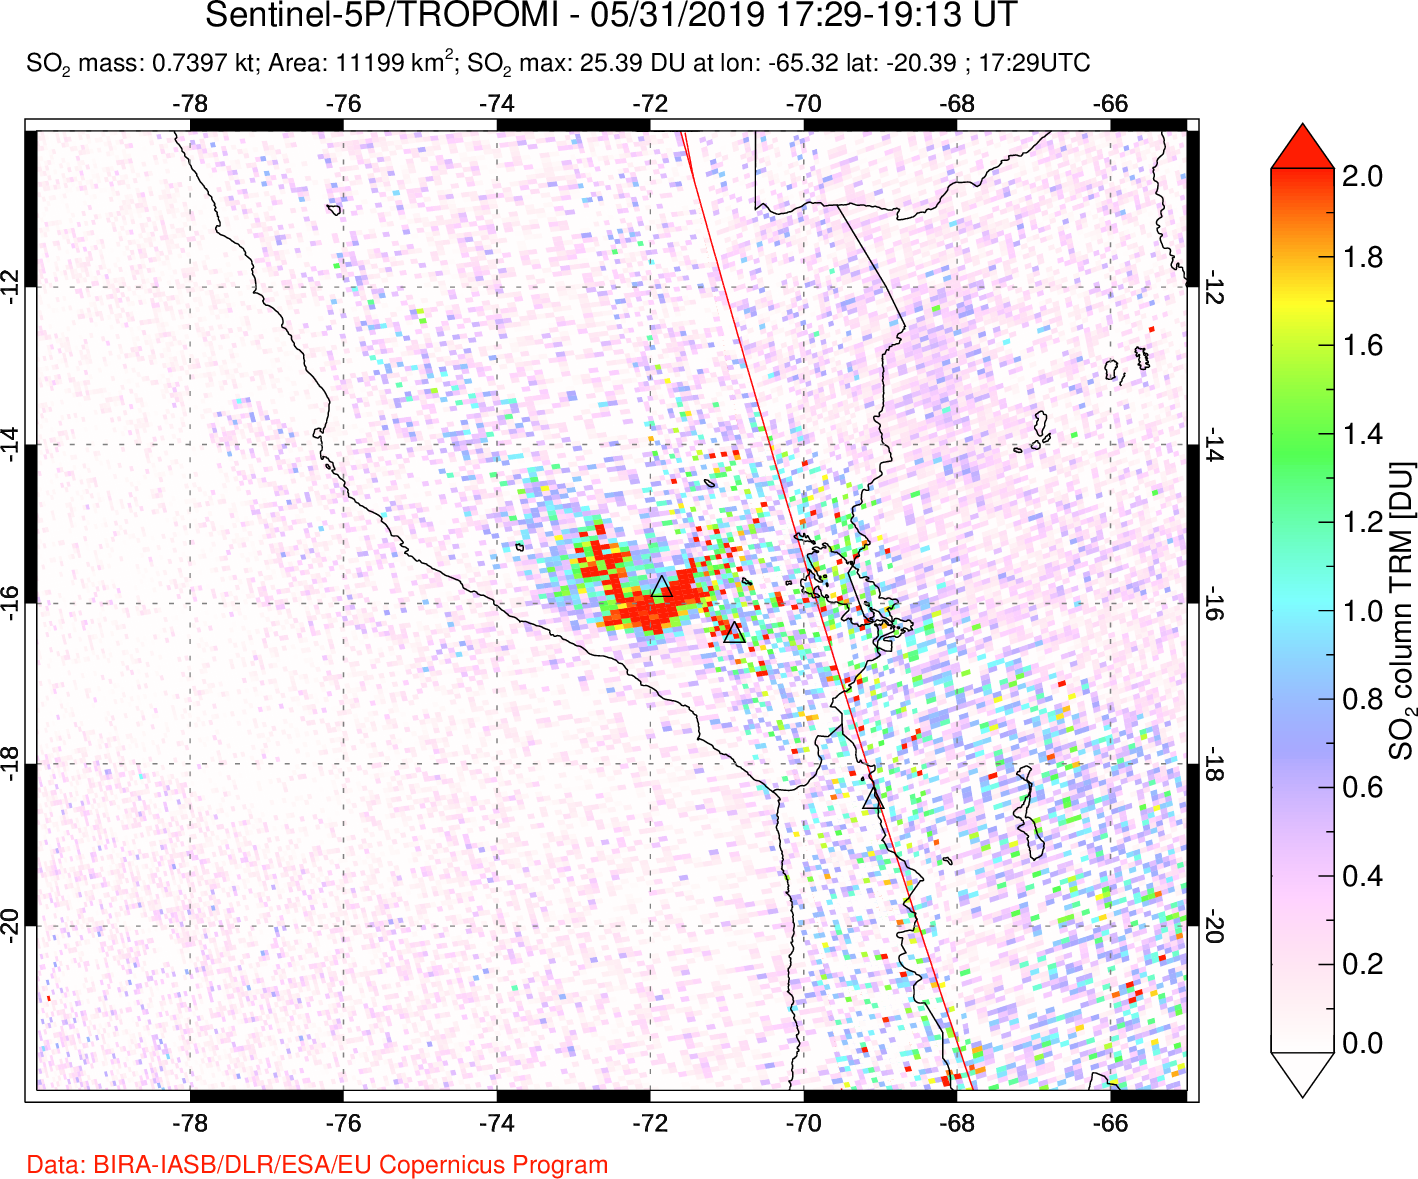 A sulfur dioxide image over Peru on May 31, 2019.